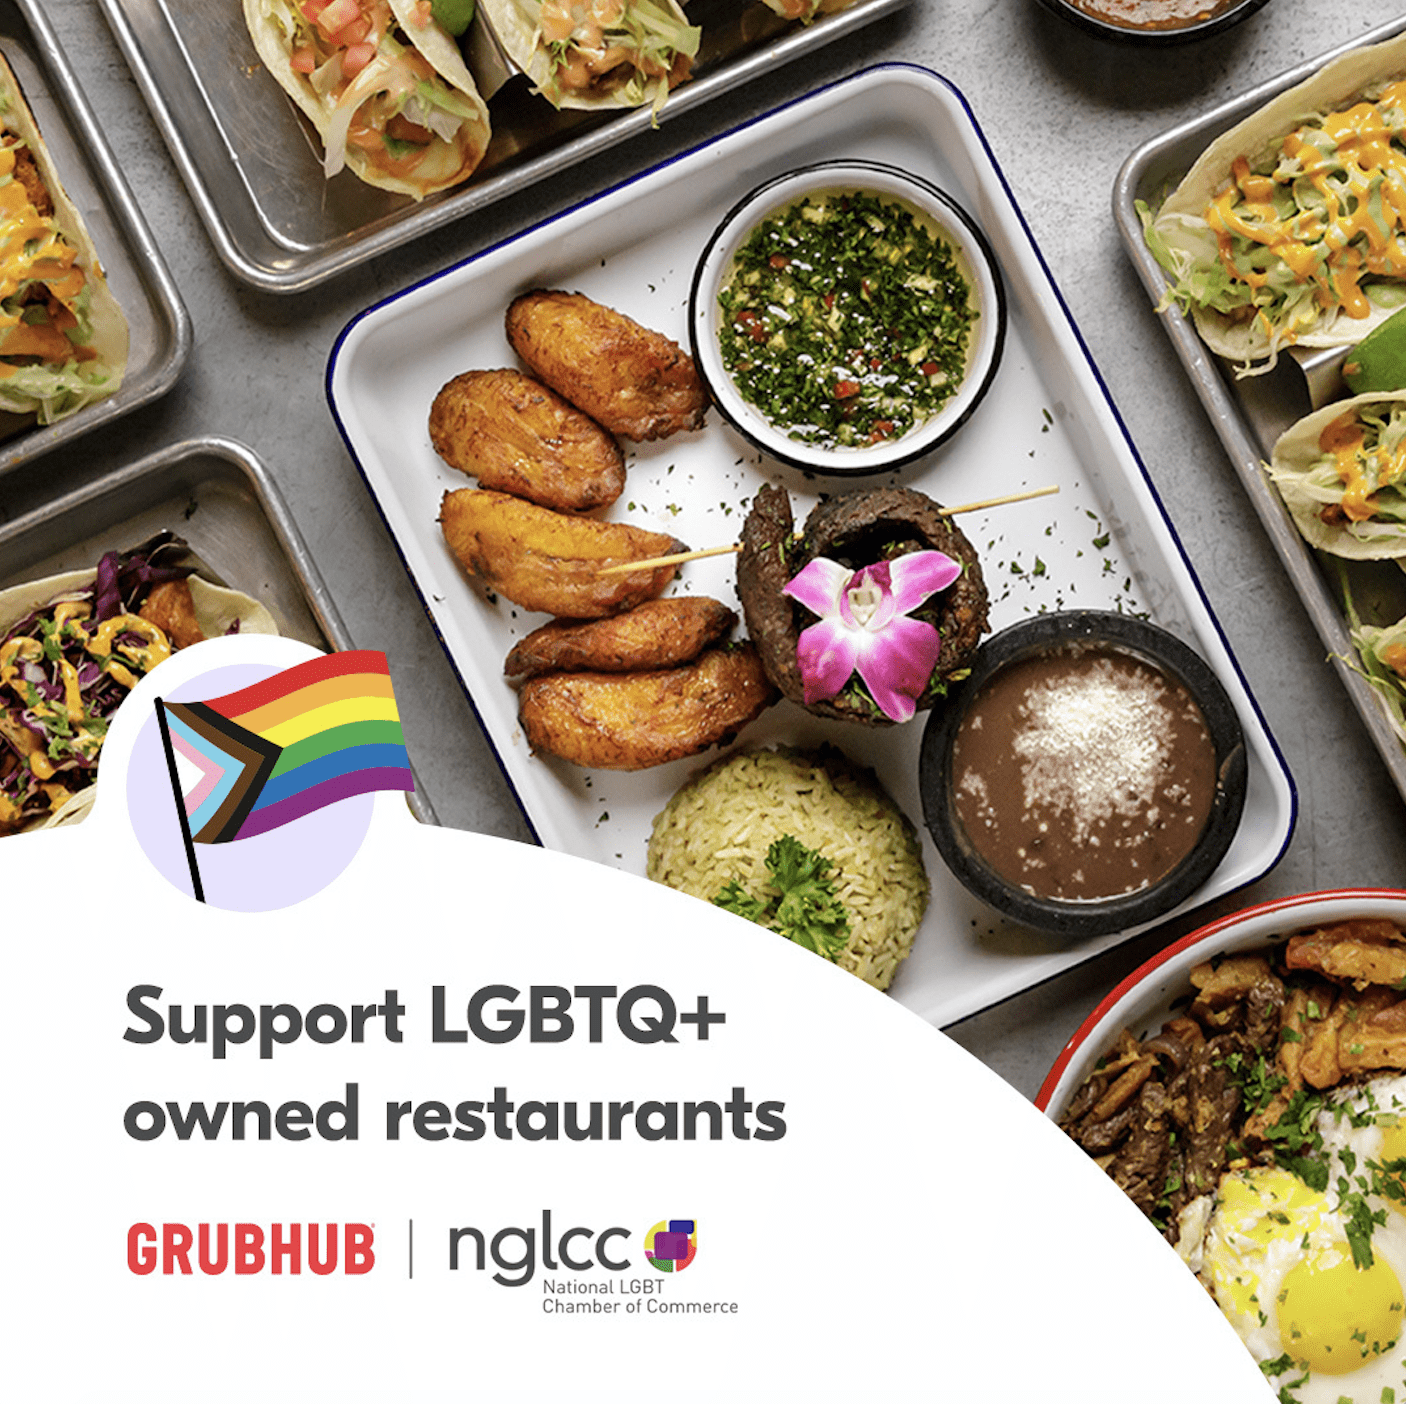 Grubhub Teams Up With National Lgbt Chamber Of Commerce To Support Lgbtq Owned Restaurants